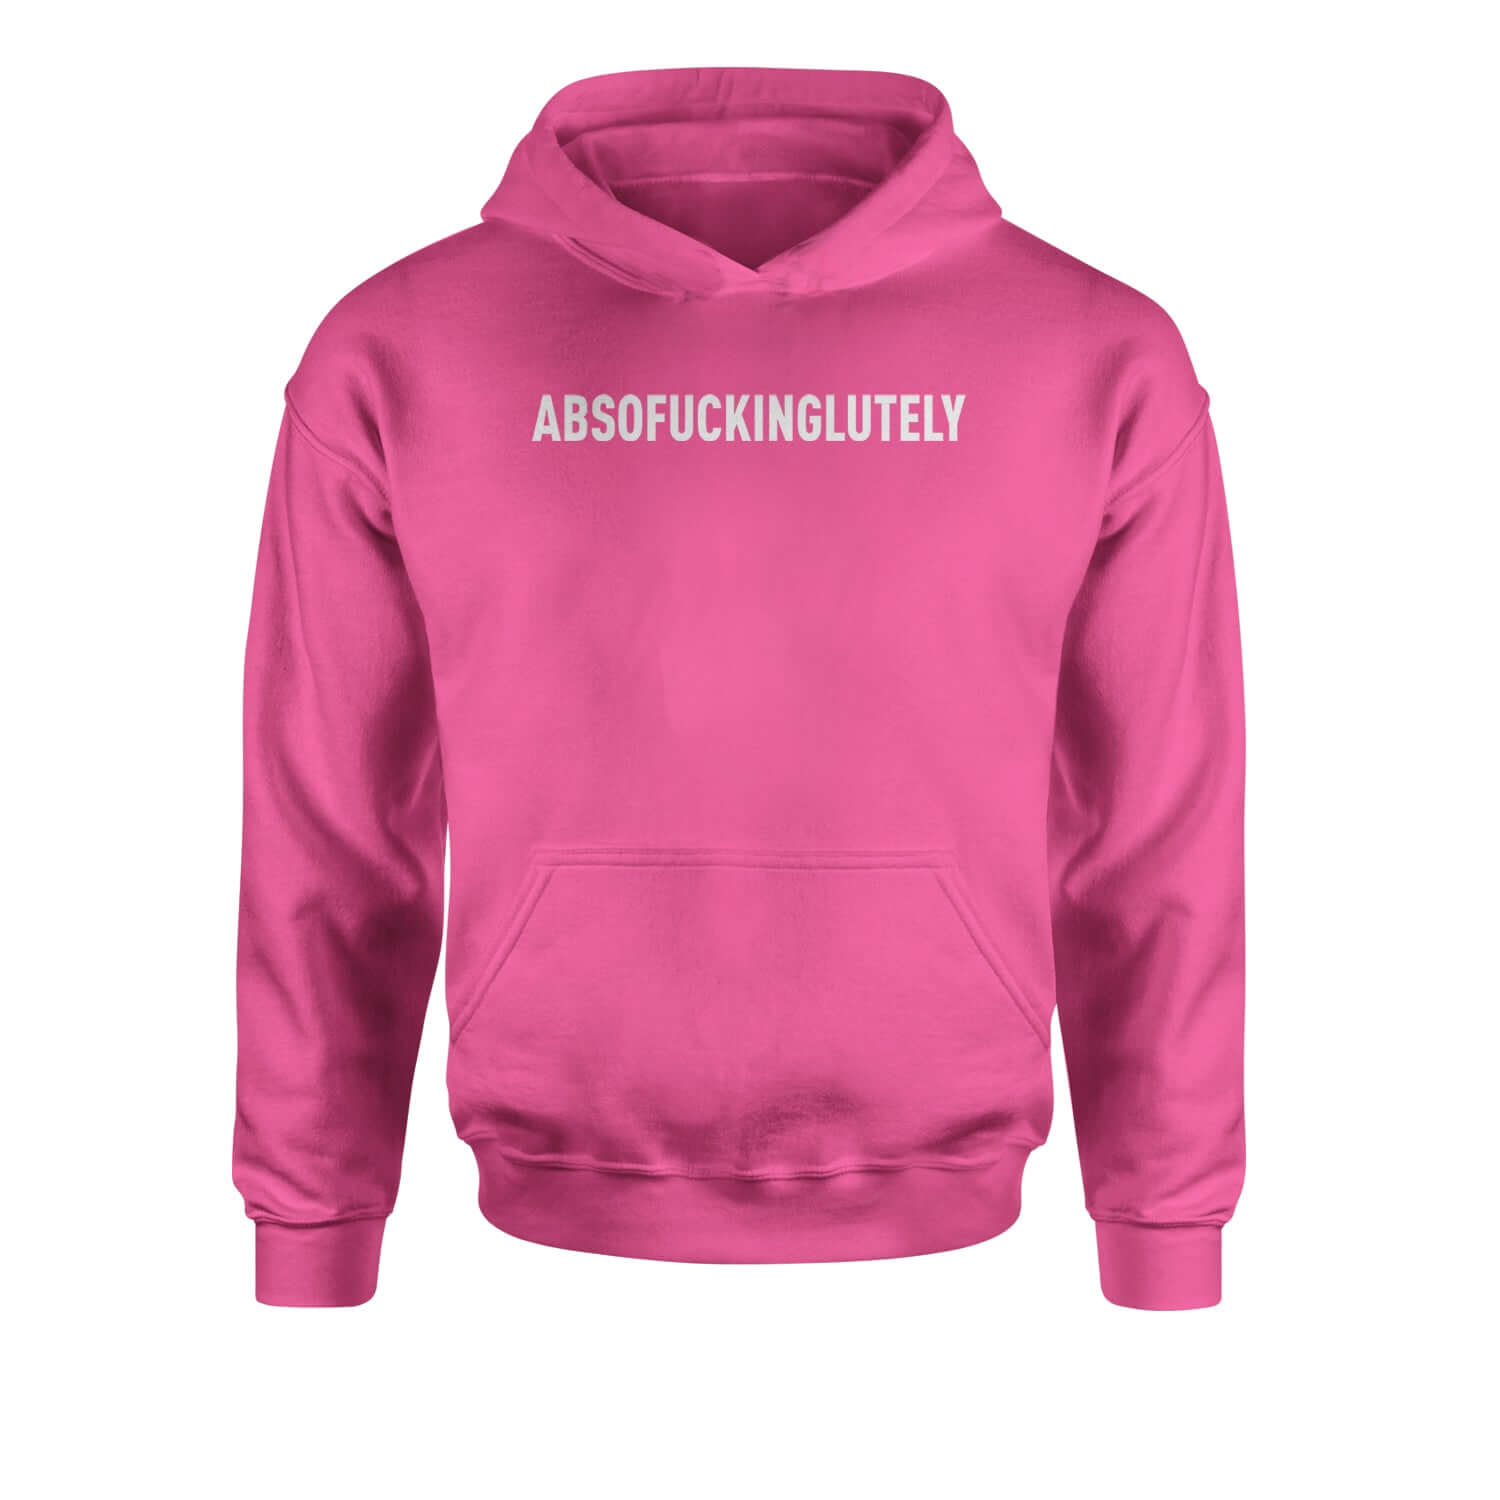 Abso f-cking lutely Youth-Sized Hoodie funny, shirt by Expression Tees